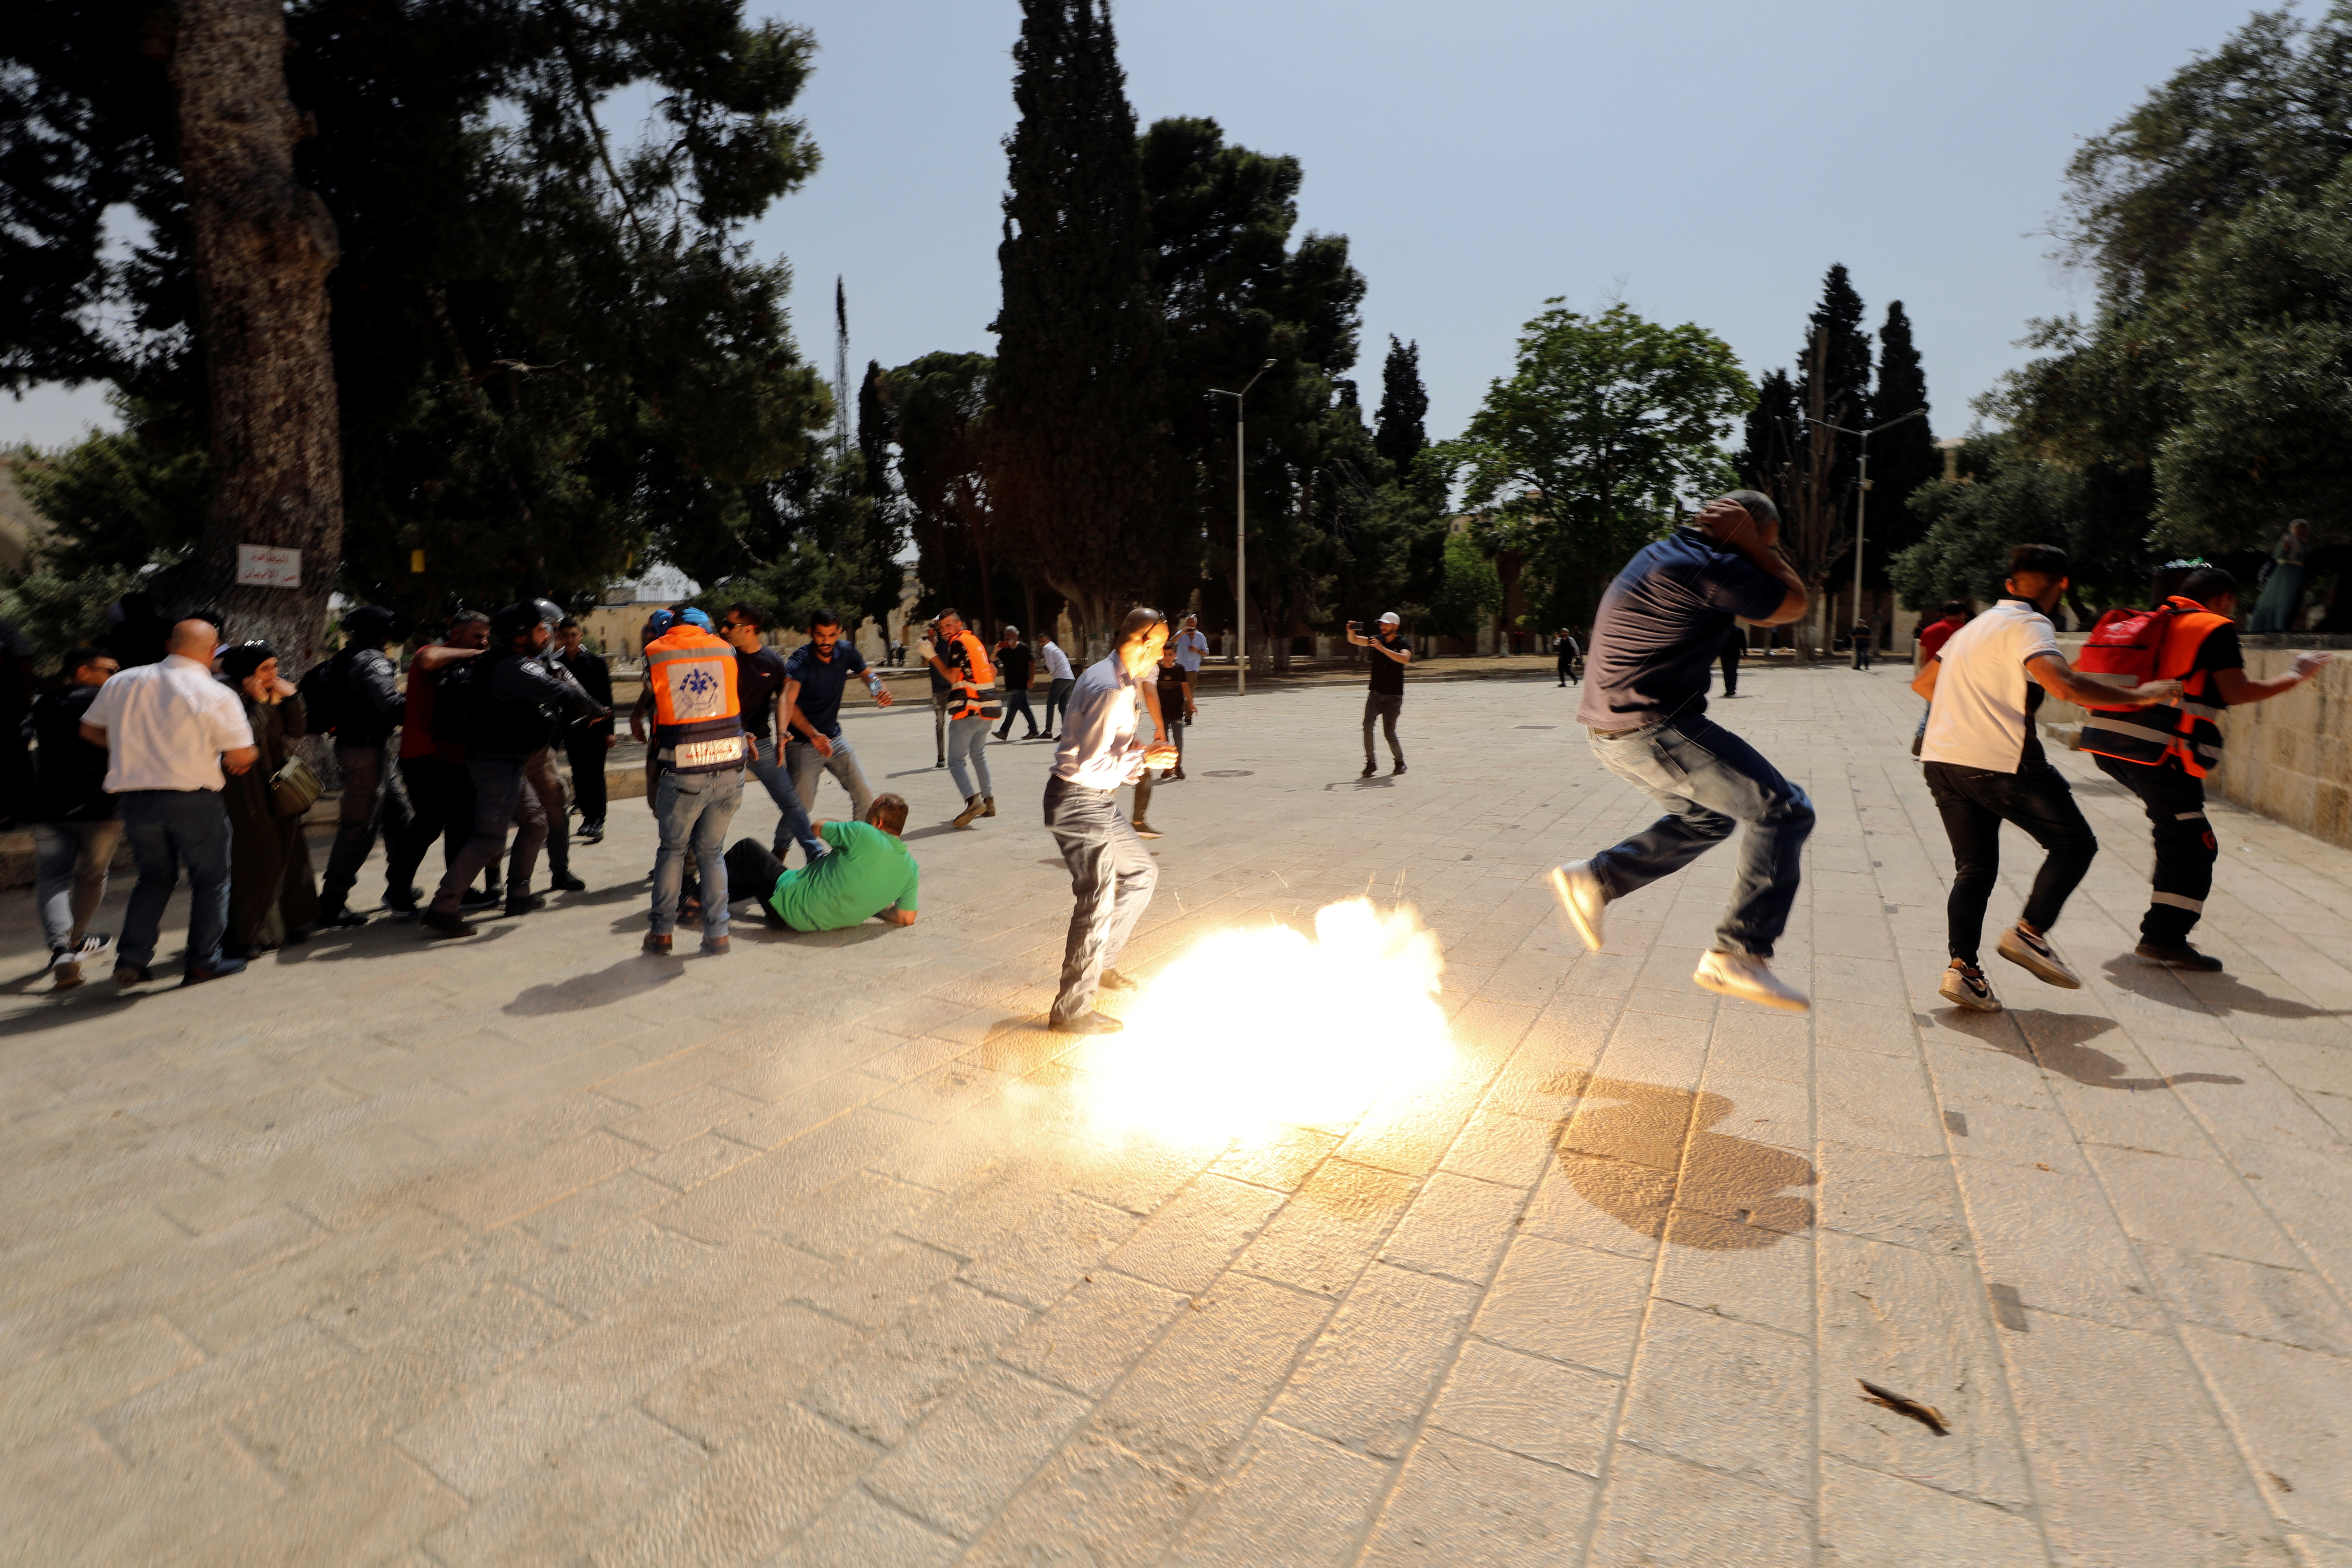 Clashes at the compound that houses Al-Aqsa Mosque in Jerusalem's Old City